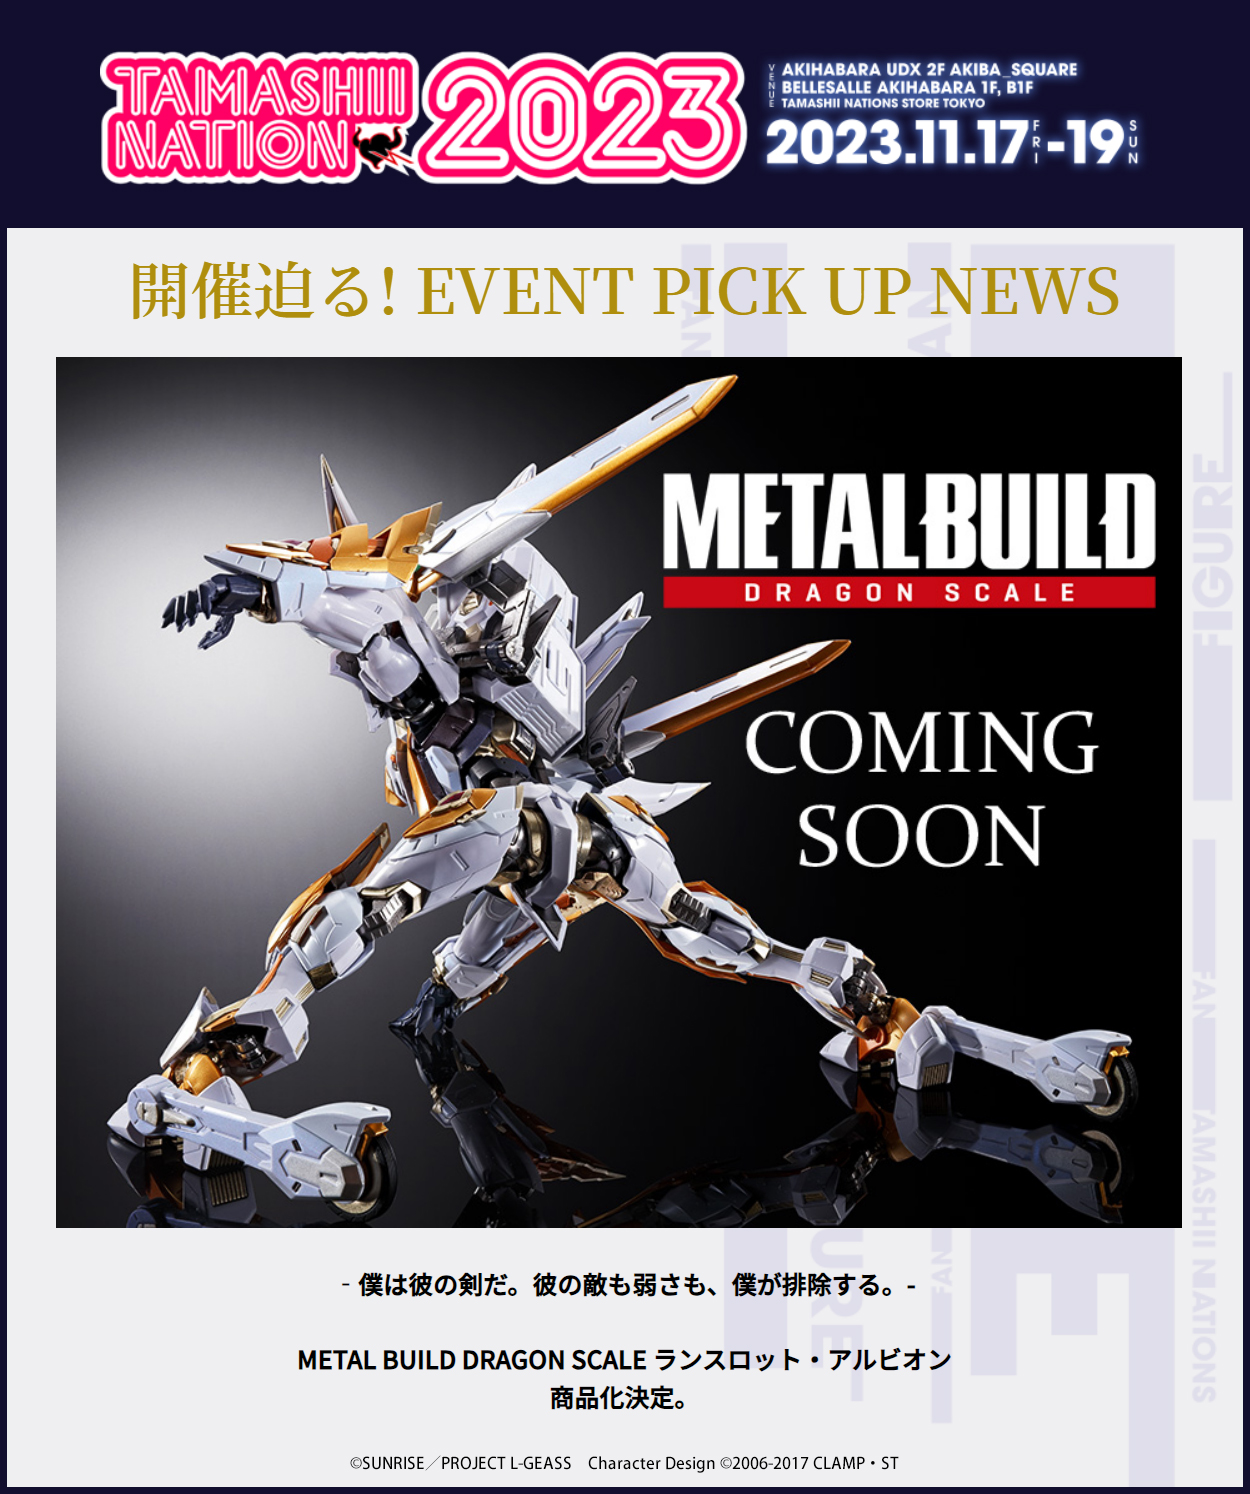 METAL BUILD DRAGON SCALE ランスロット・アルビオン」商品化決定！ - HOBBY Watch